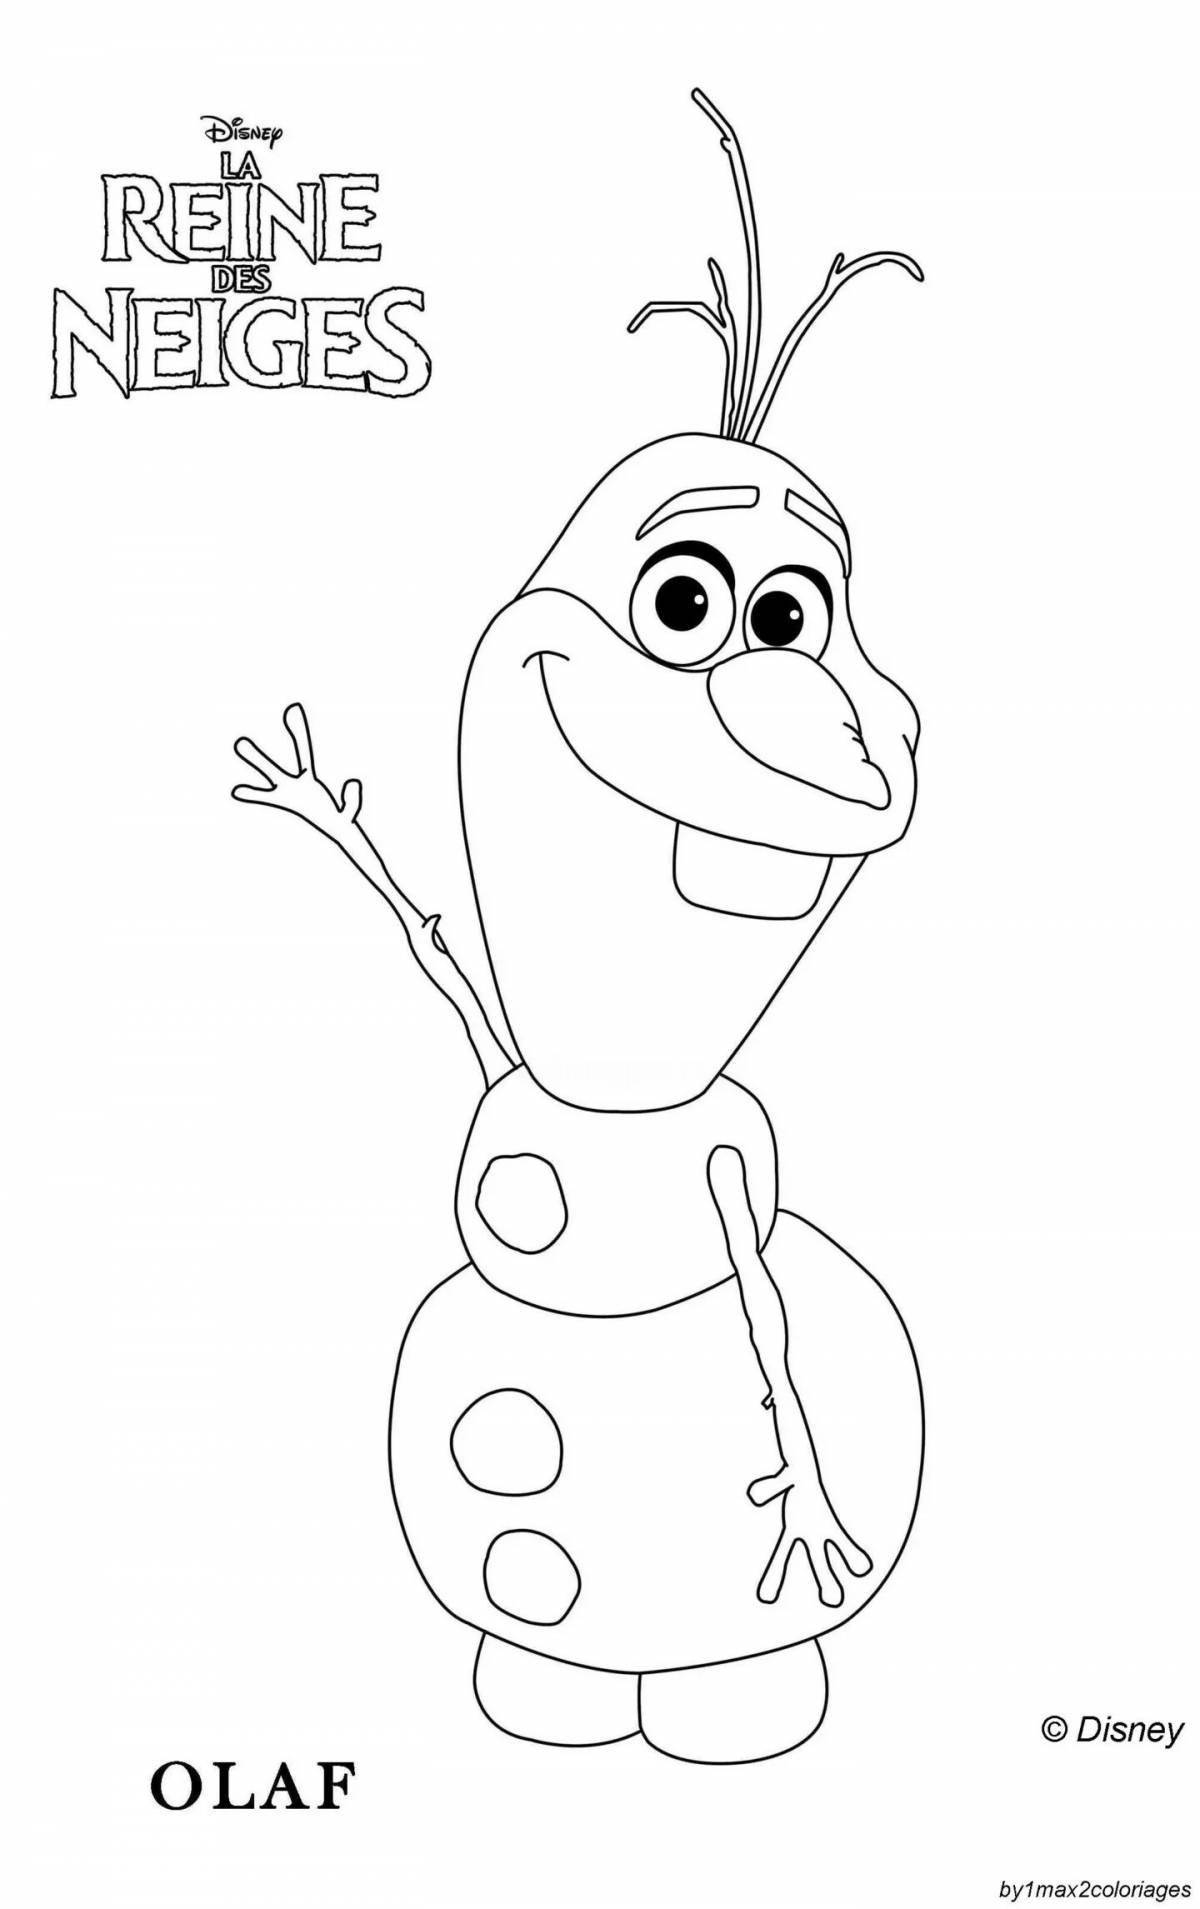 Olaf's quirky snowman coloring page